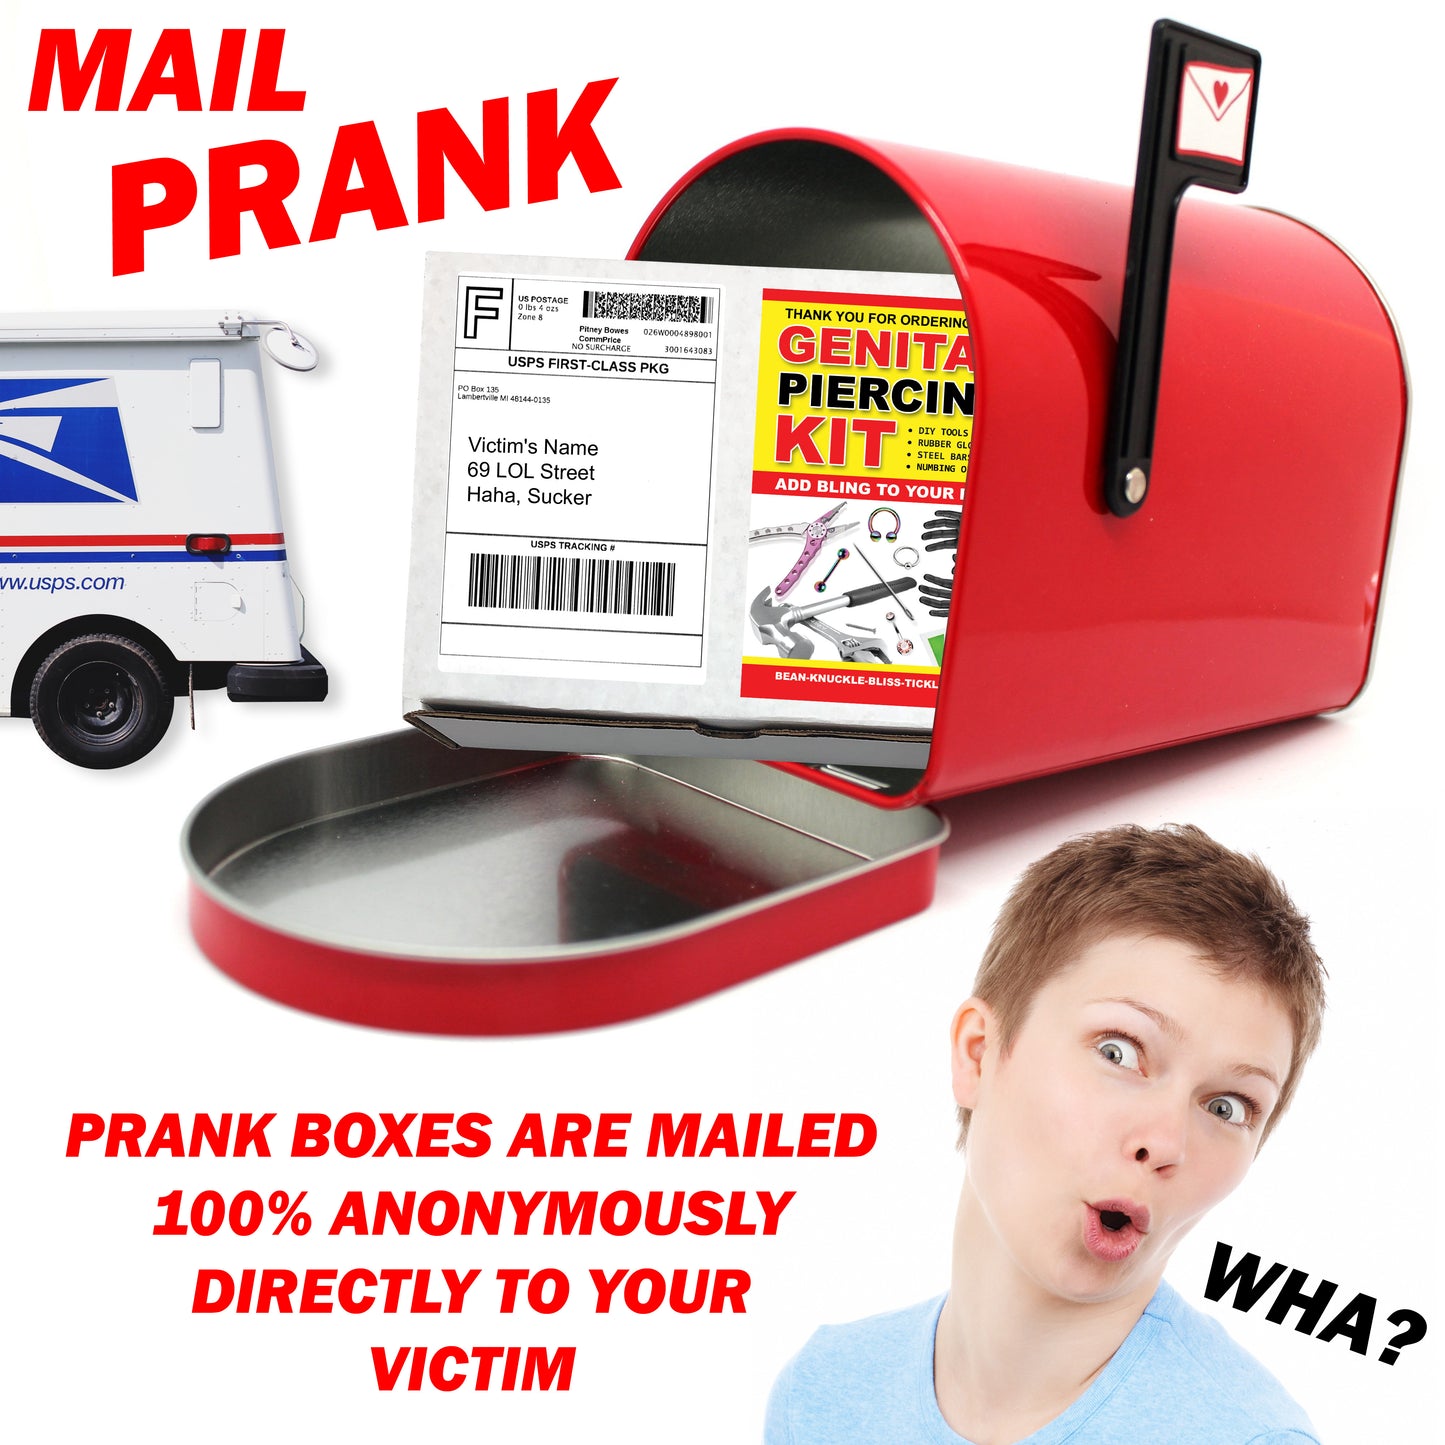 Genital Piercing Kit embarrassing prank box gets mailed directly to your victims 100% anonymously!